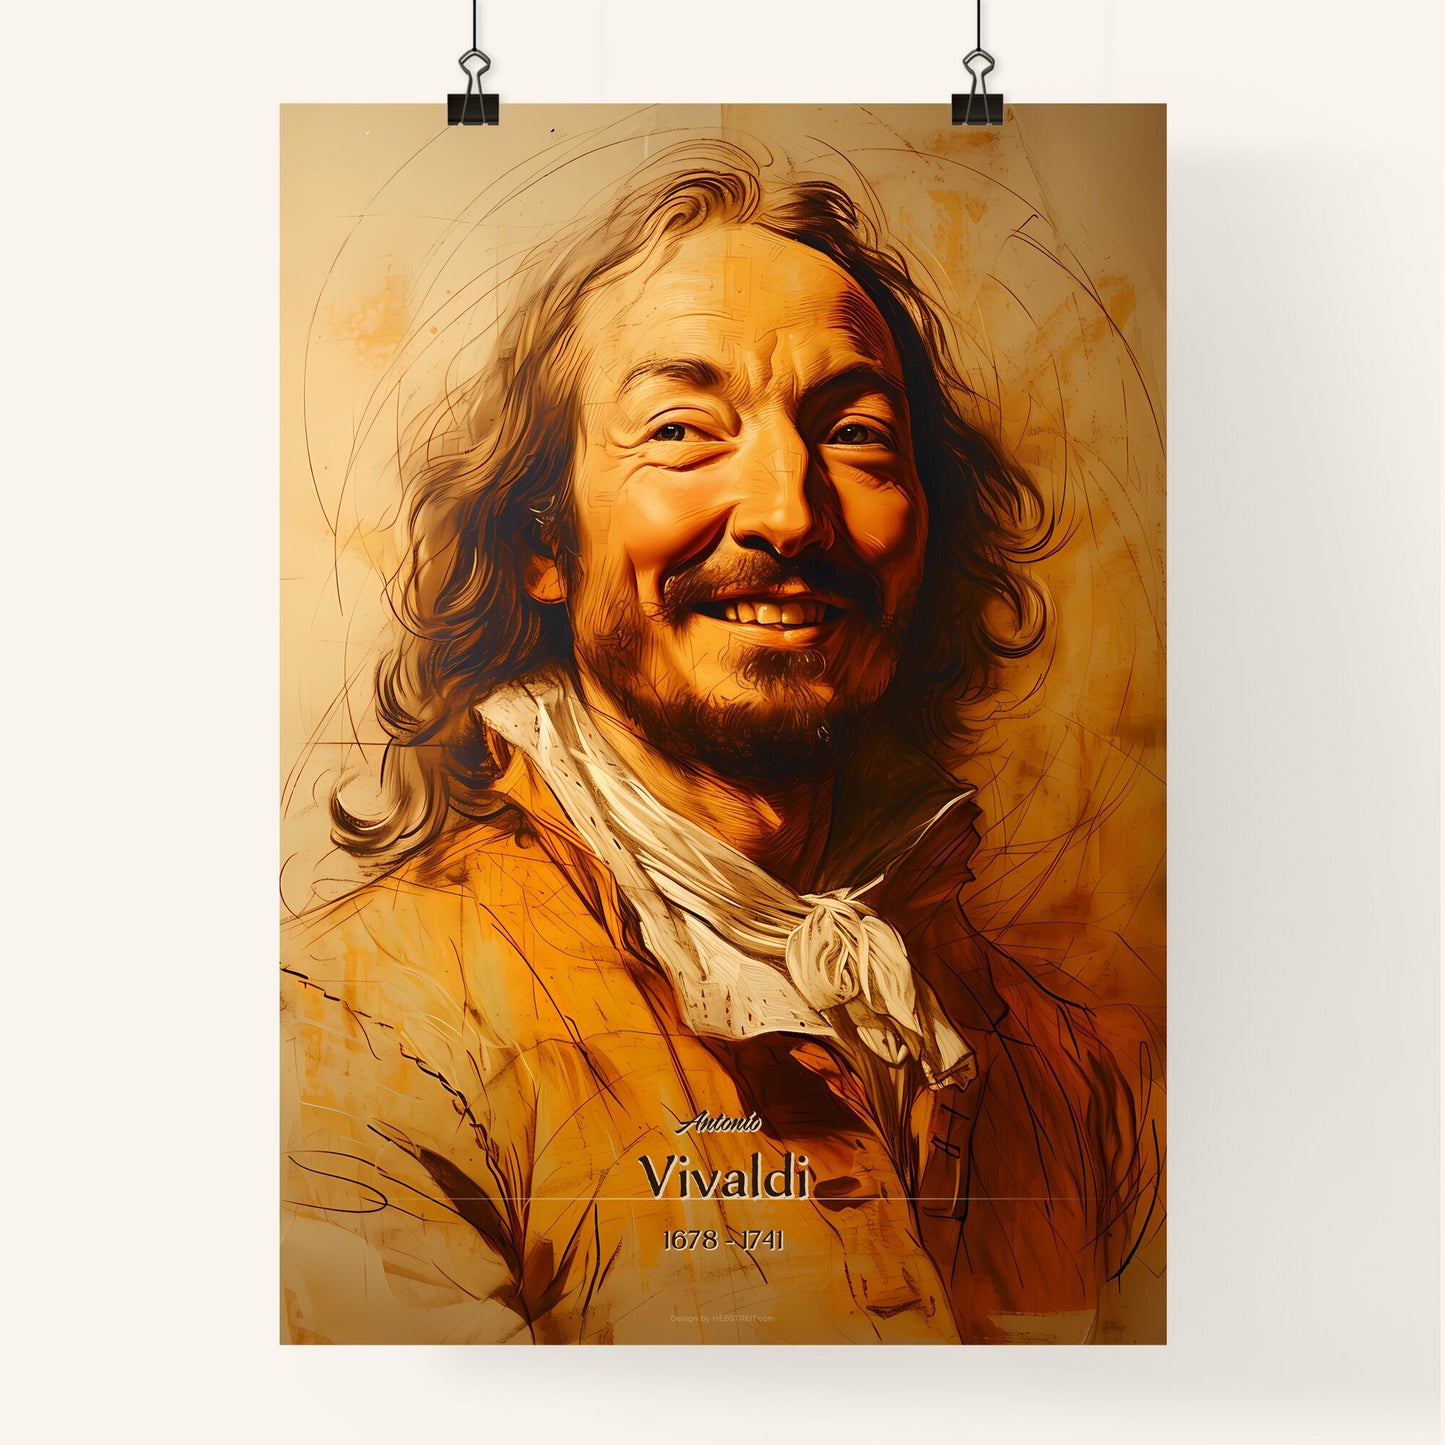 Antonio, Vivaldi, 1678 - 1741, A Poster of a man with long hair and a beard Default Title